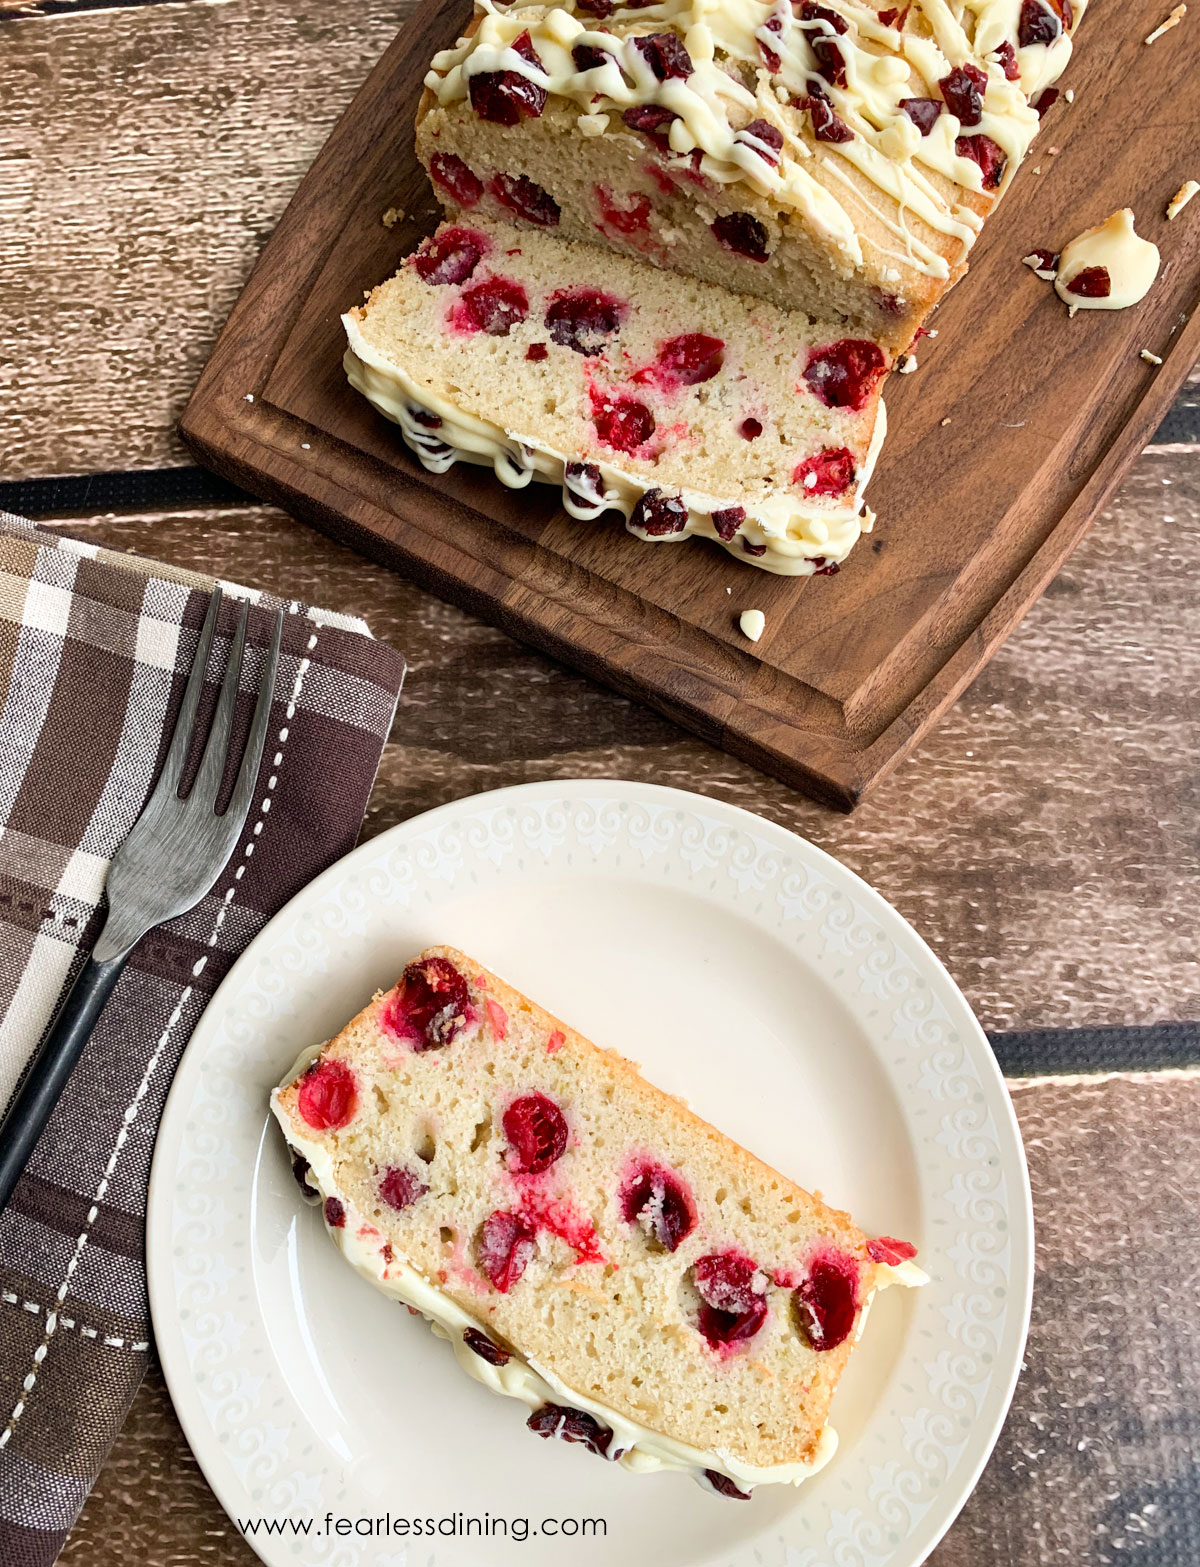 A slice of gluten free cranberry cake on a plate.